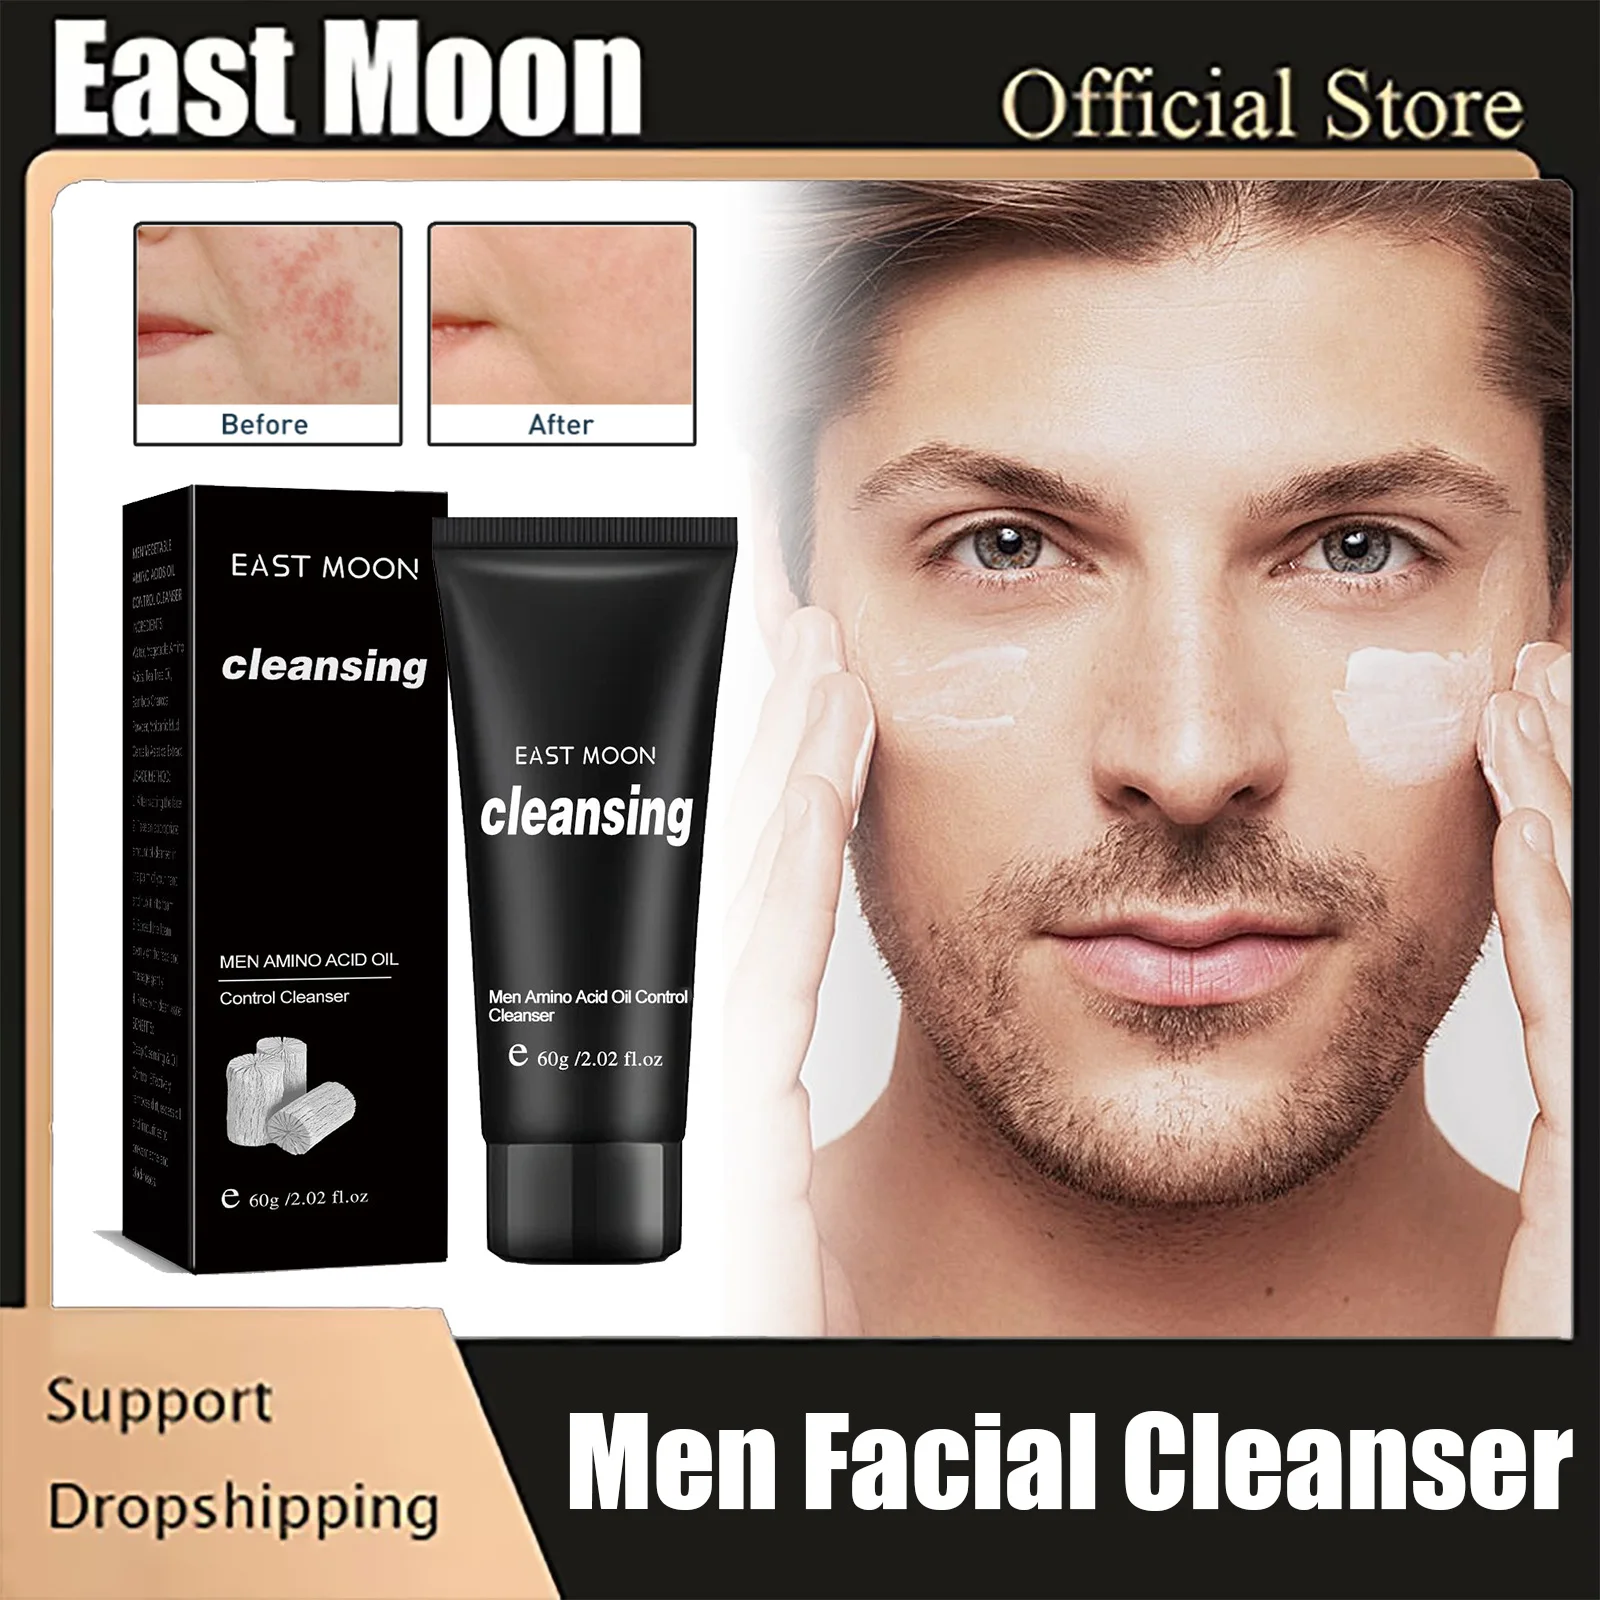 Men Facial Cleanser Anti Acne Scars Oil Control Shrink Pores Exfoliating Hydrating Deep Cleansing Refreshing Whitening Face Wash